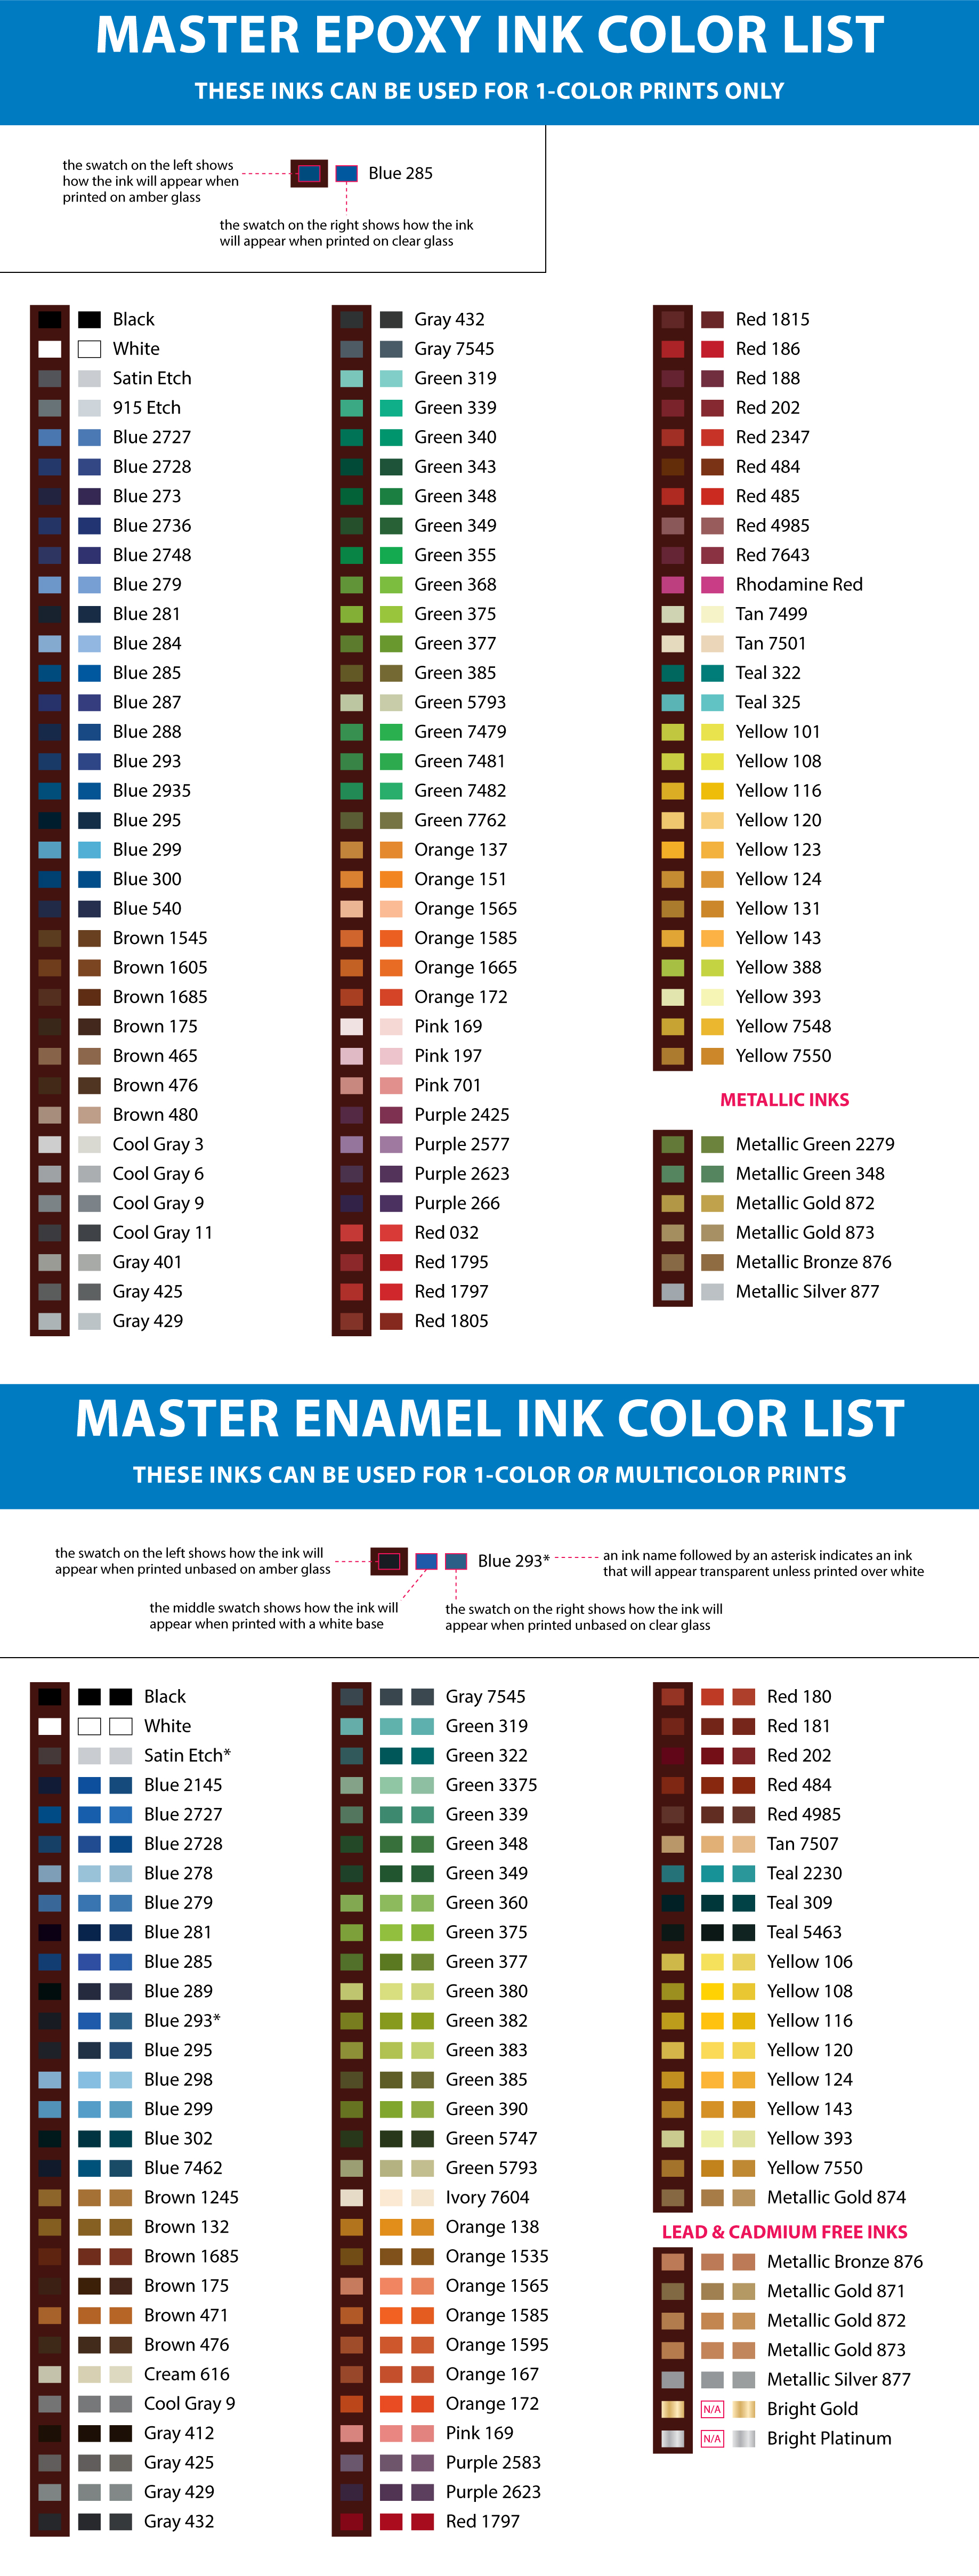 Glass Epoxy Ink Color List